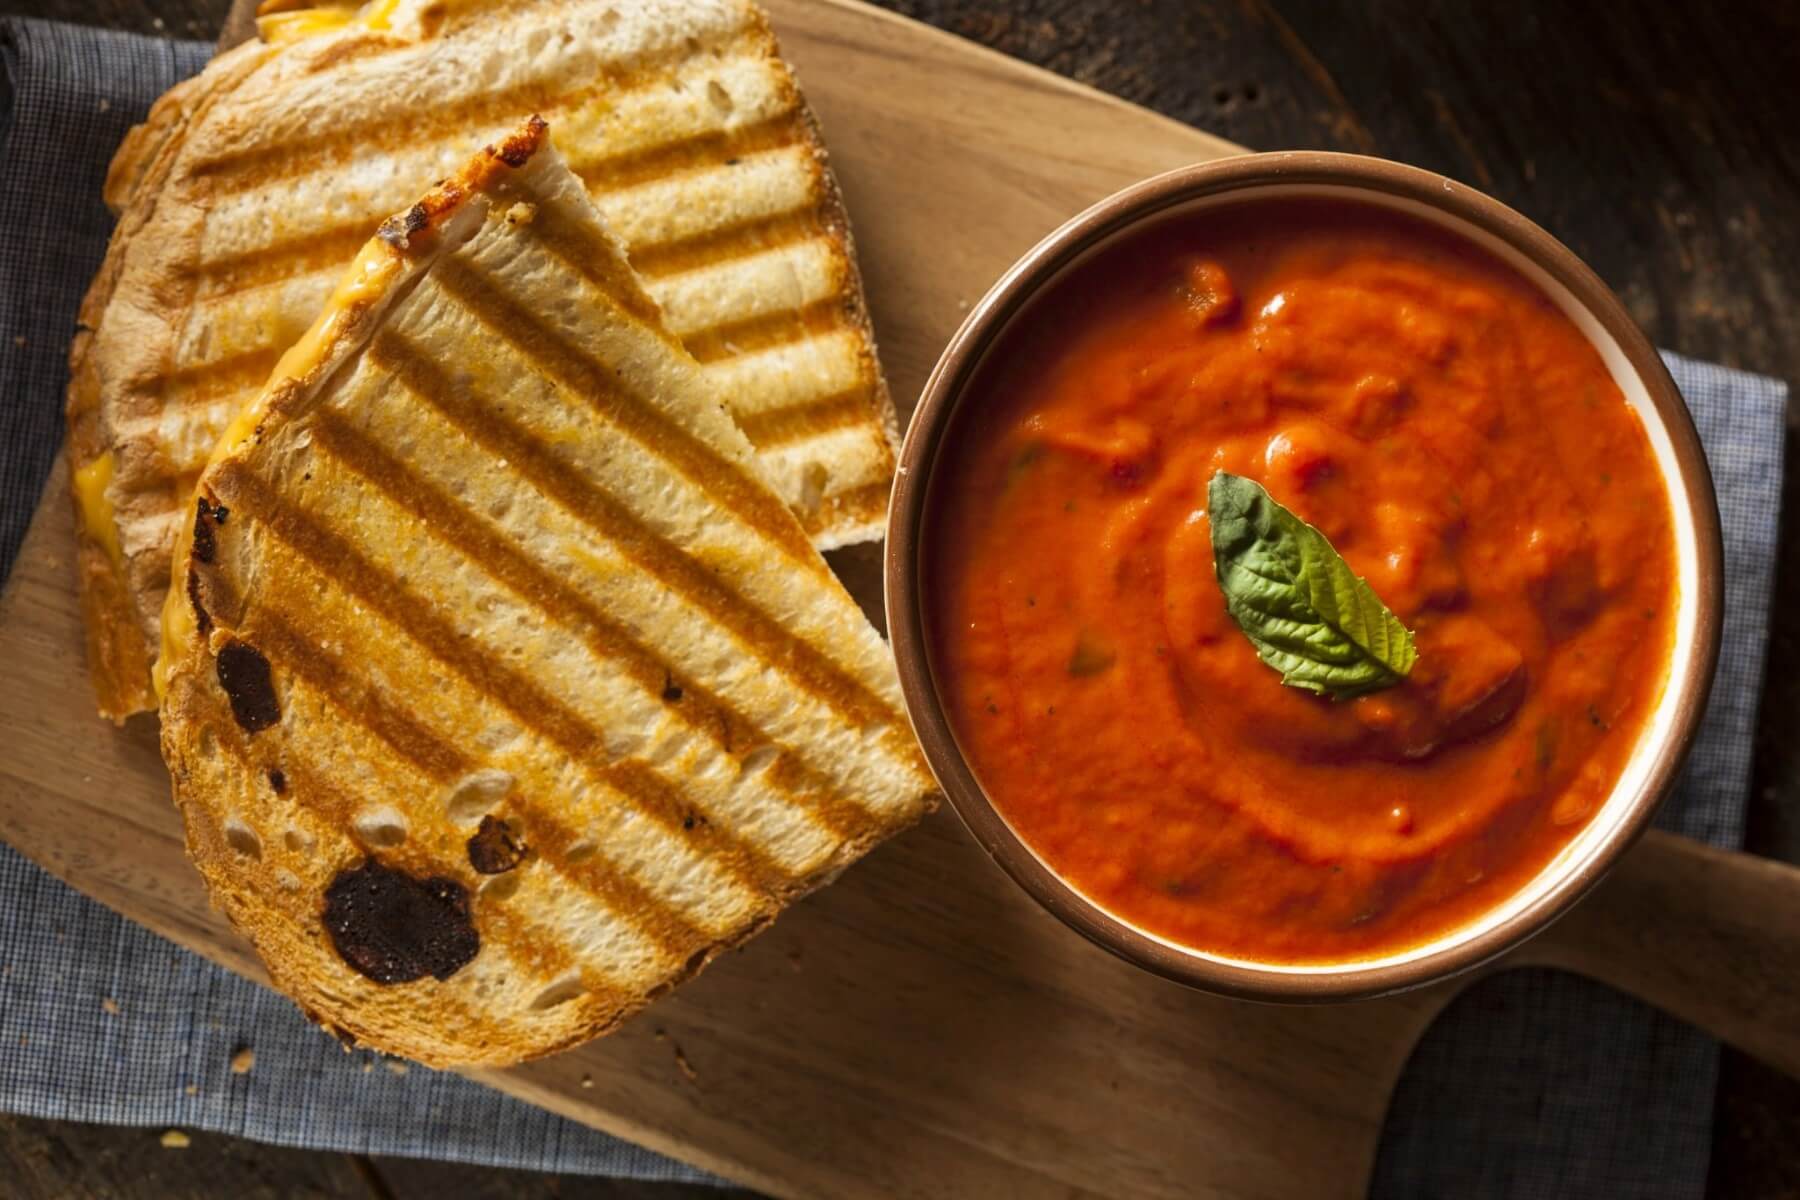 Roasted Tomato Soup Recipe and Wine Pairing